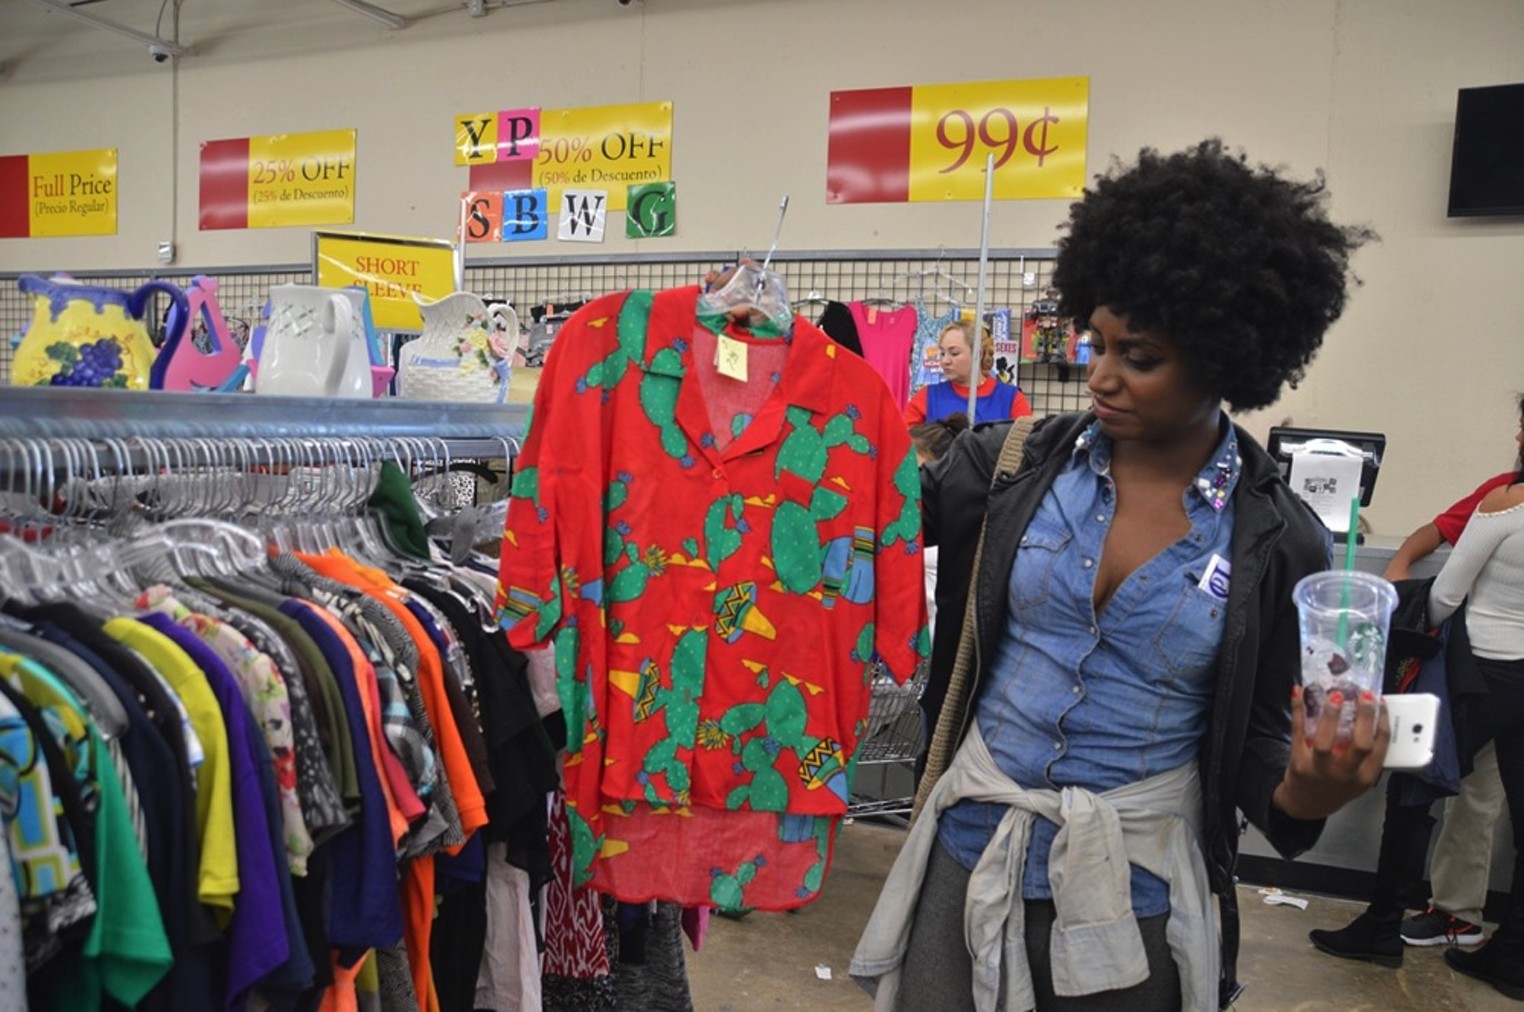 Best Thrift Store 2021 Thrift Giant Best of Dallas® 2020 Best Restaurants, Bars, Clubs, Music and Stores in Dallas Dallas Observer